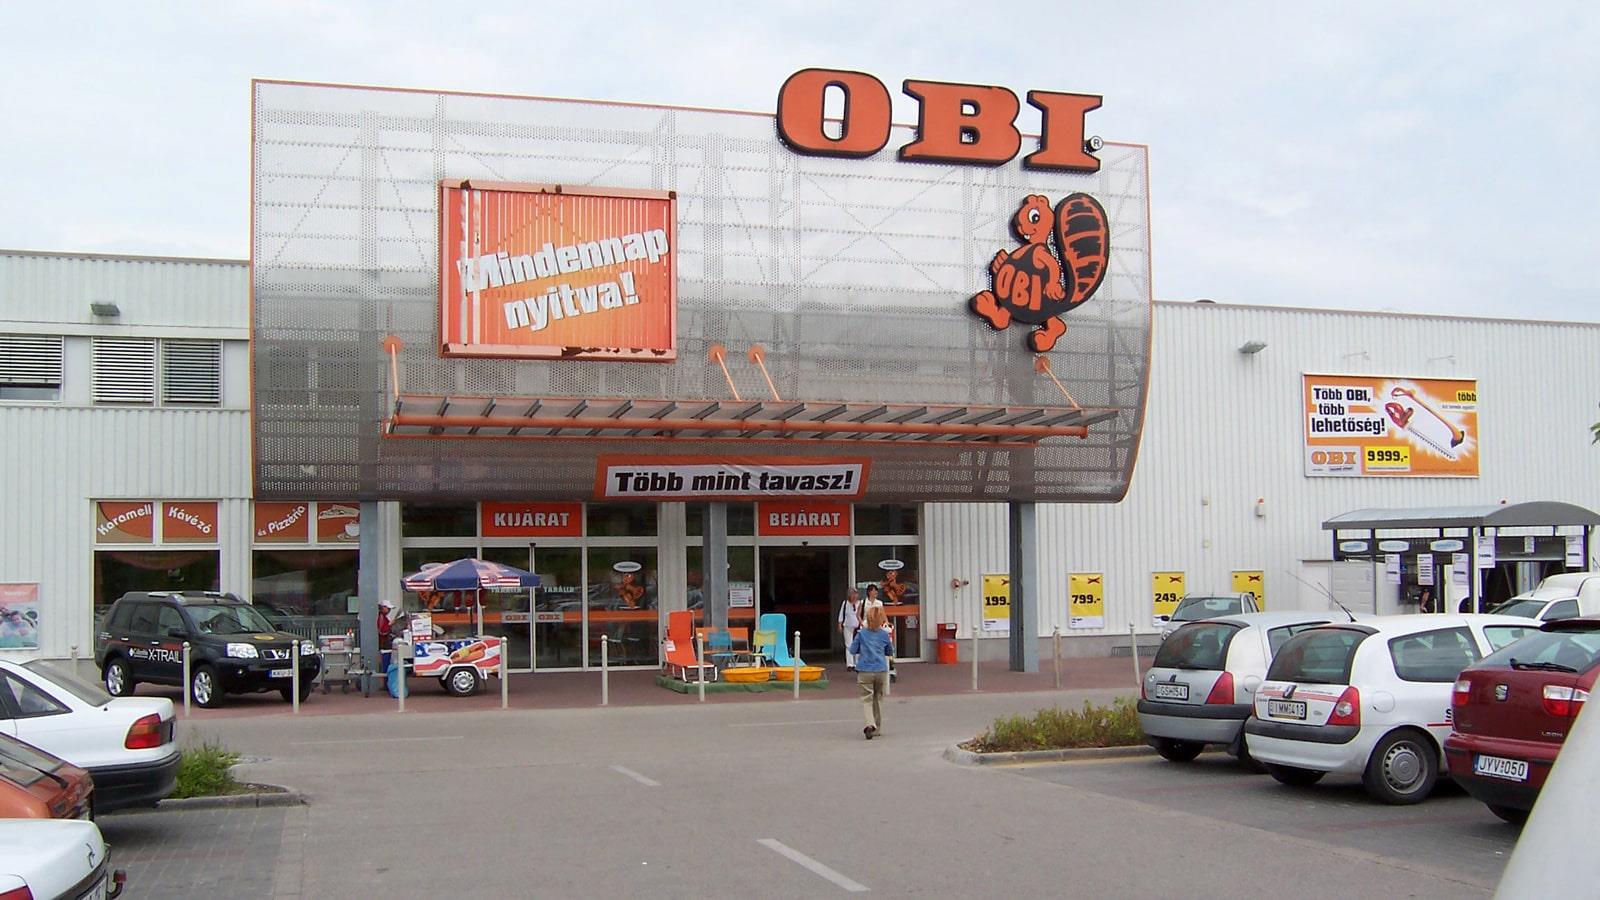 Entrance to OBI DIY store with logo and beaver symbol